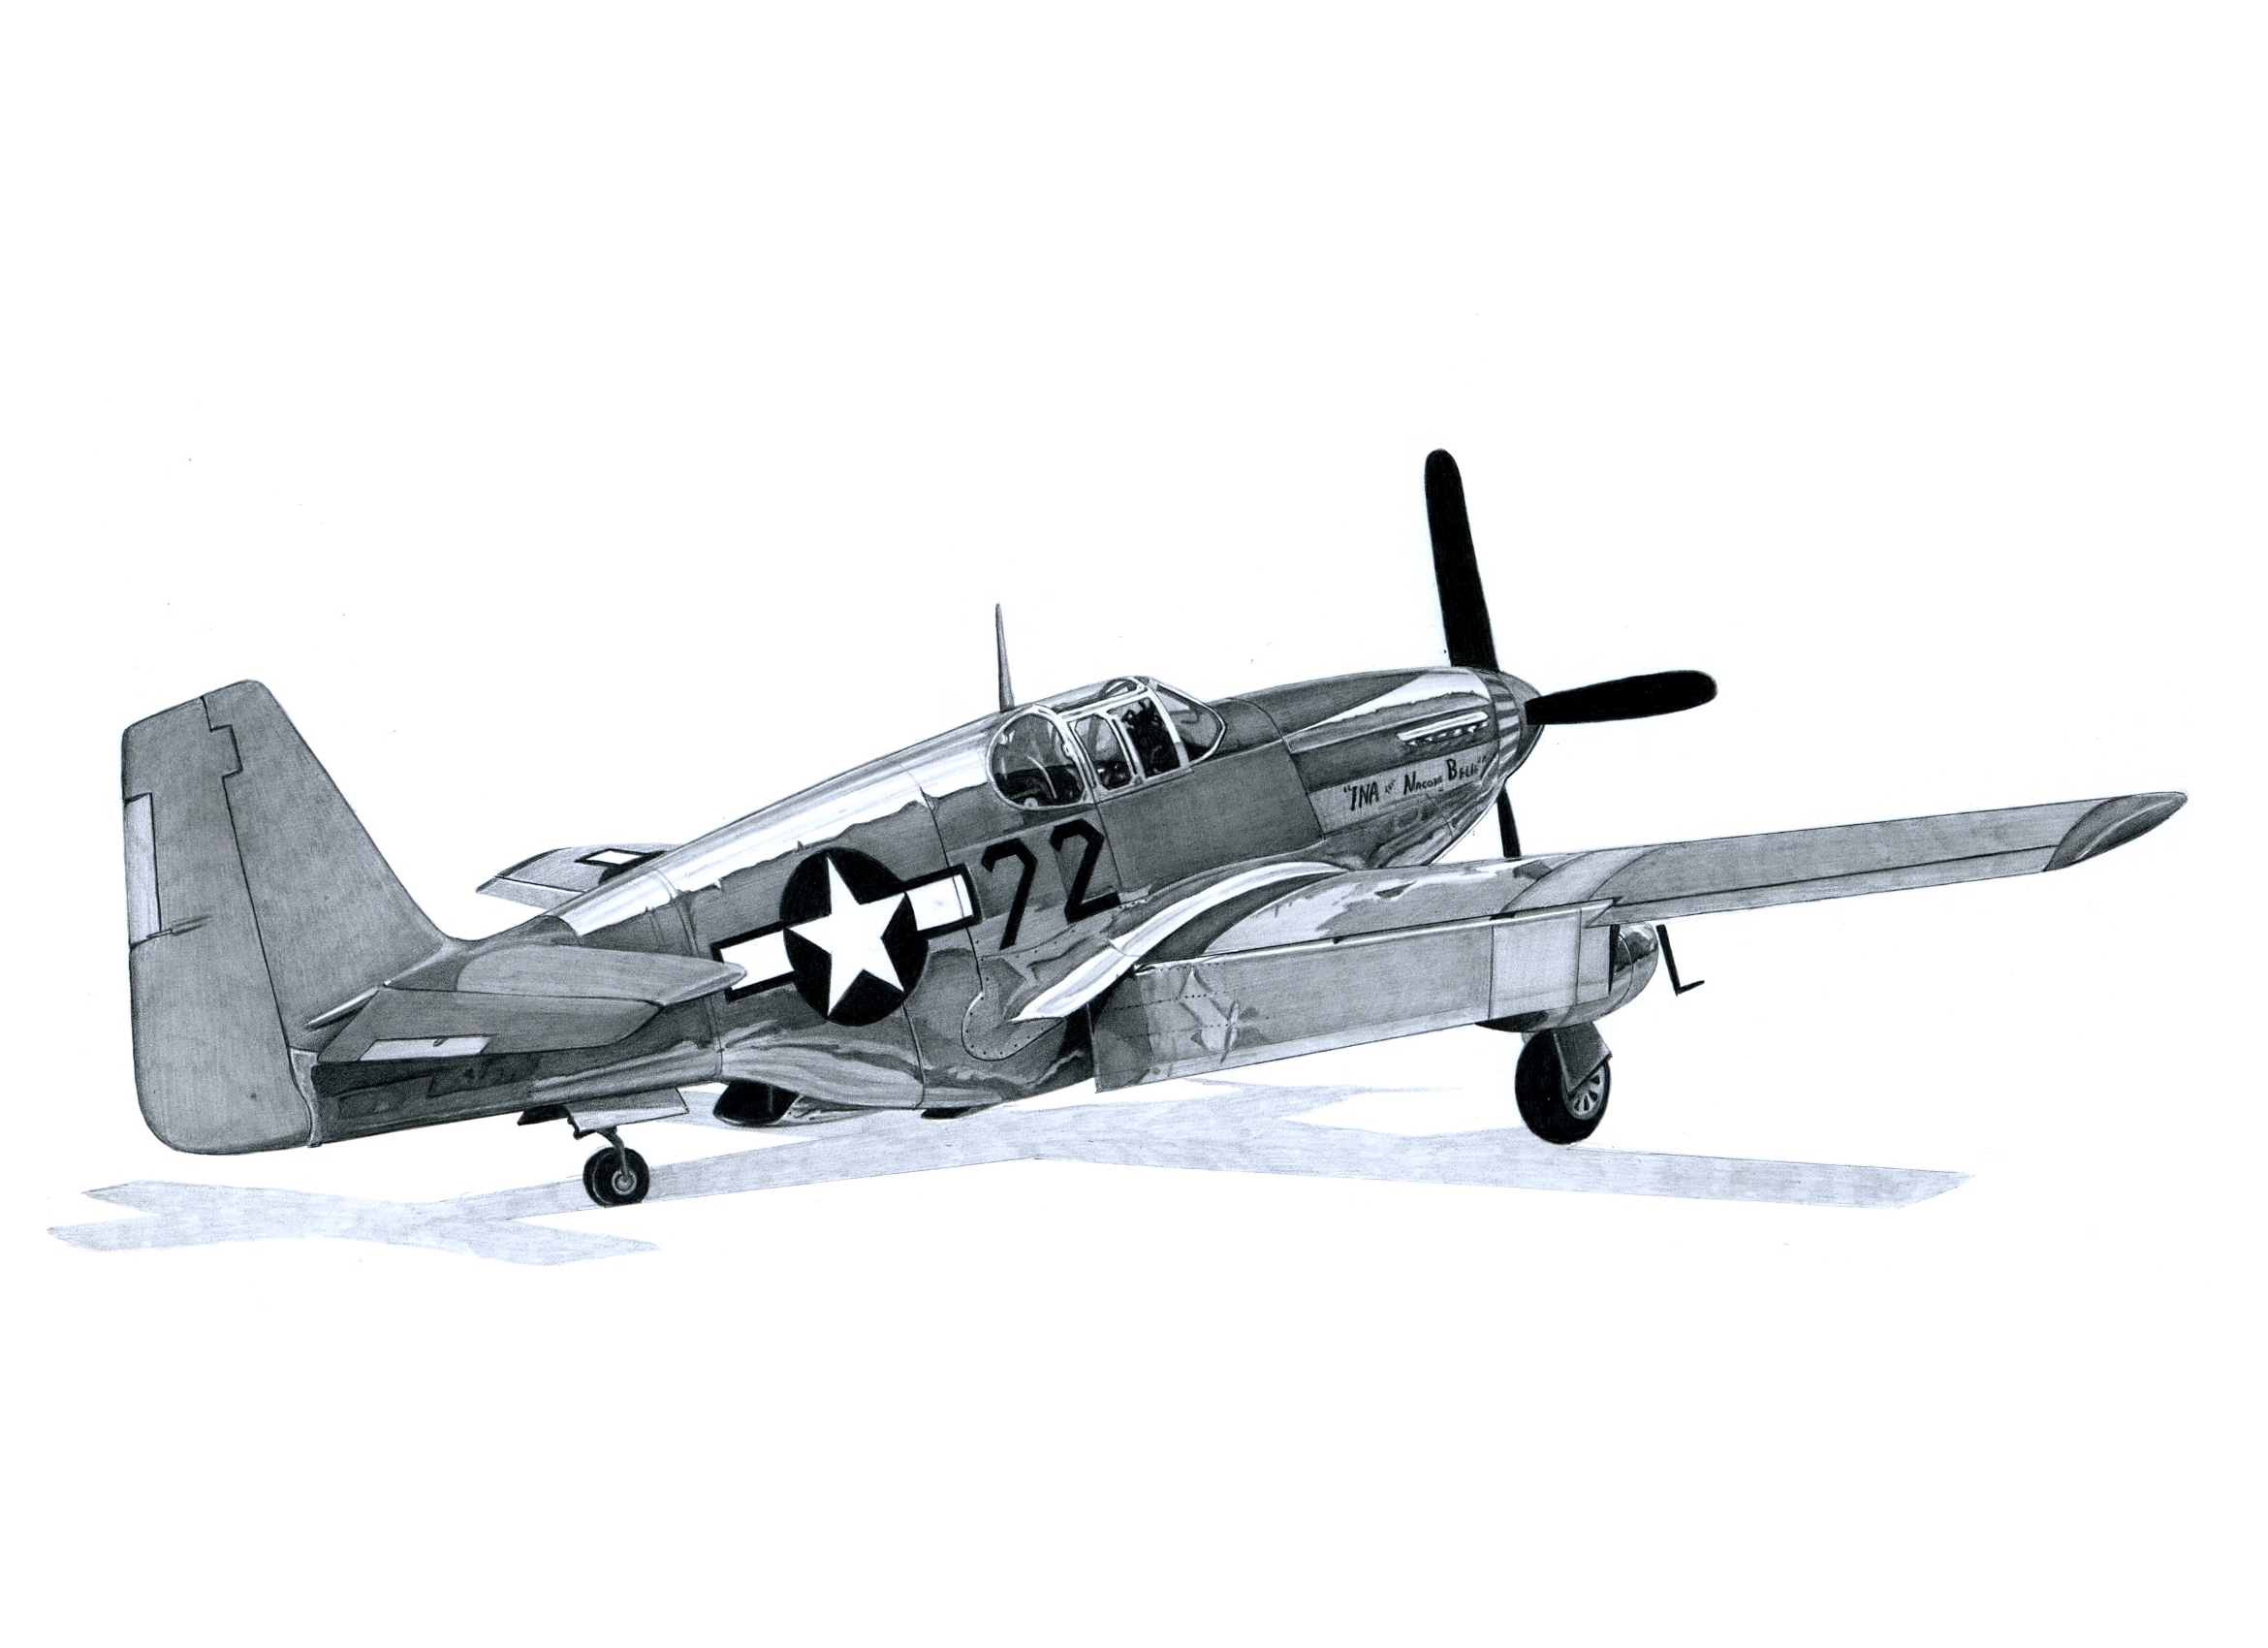 Military North American P 51 Mustang 2340x1700